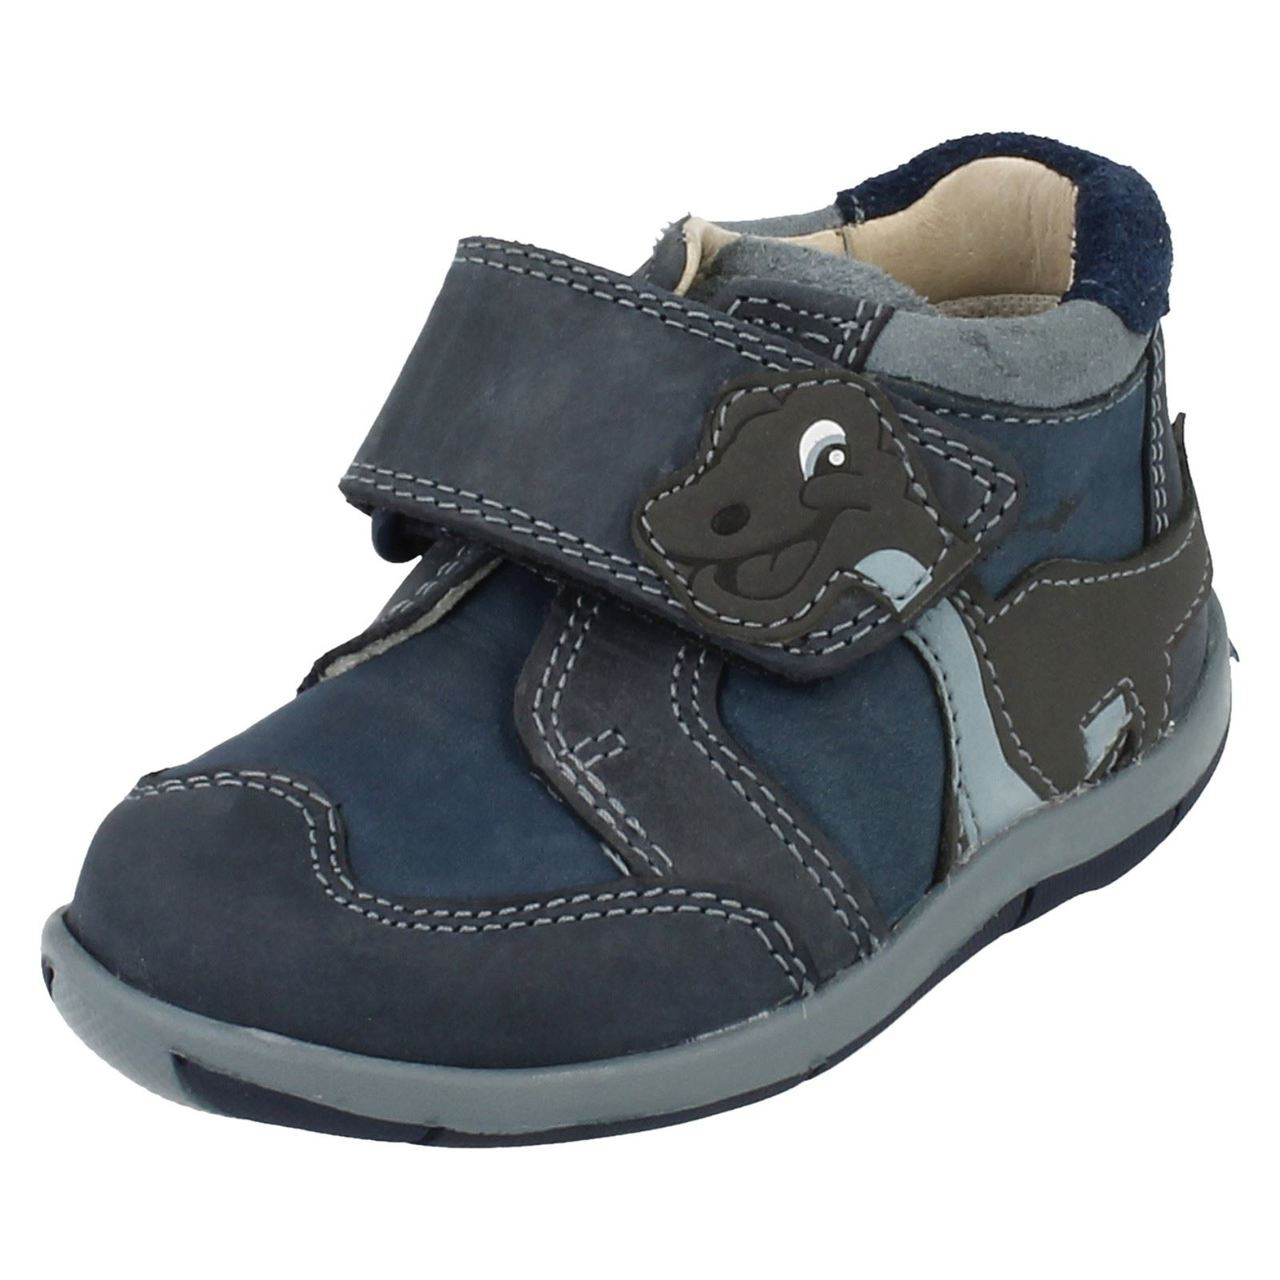 clarks first boots